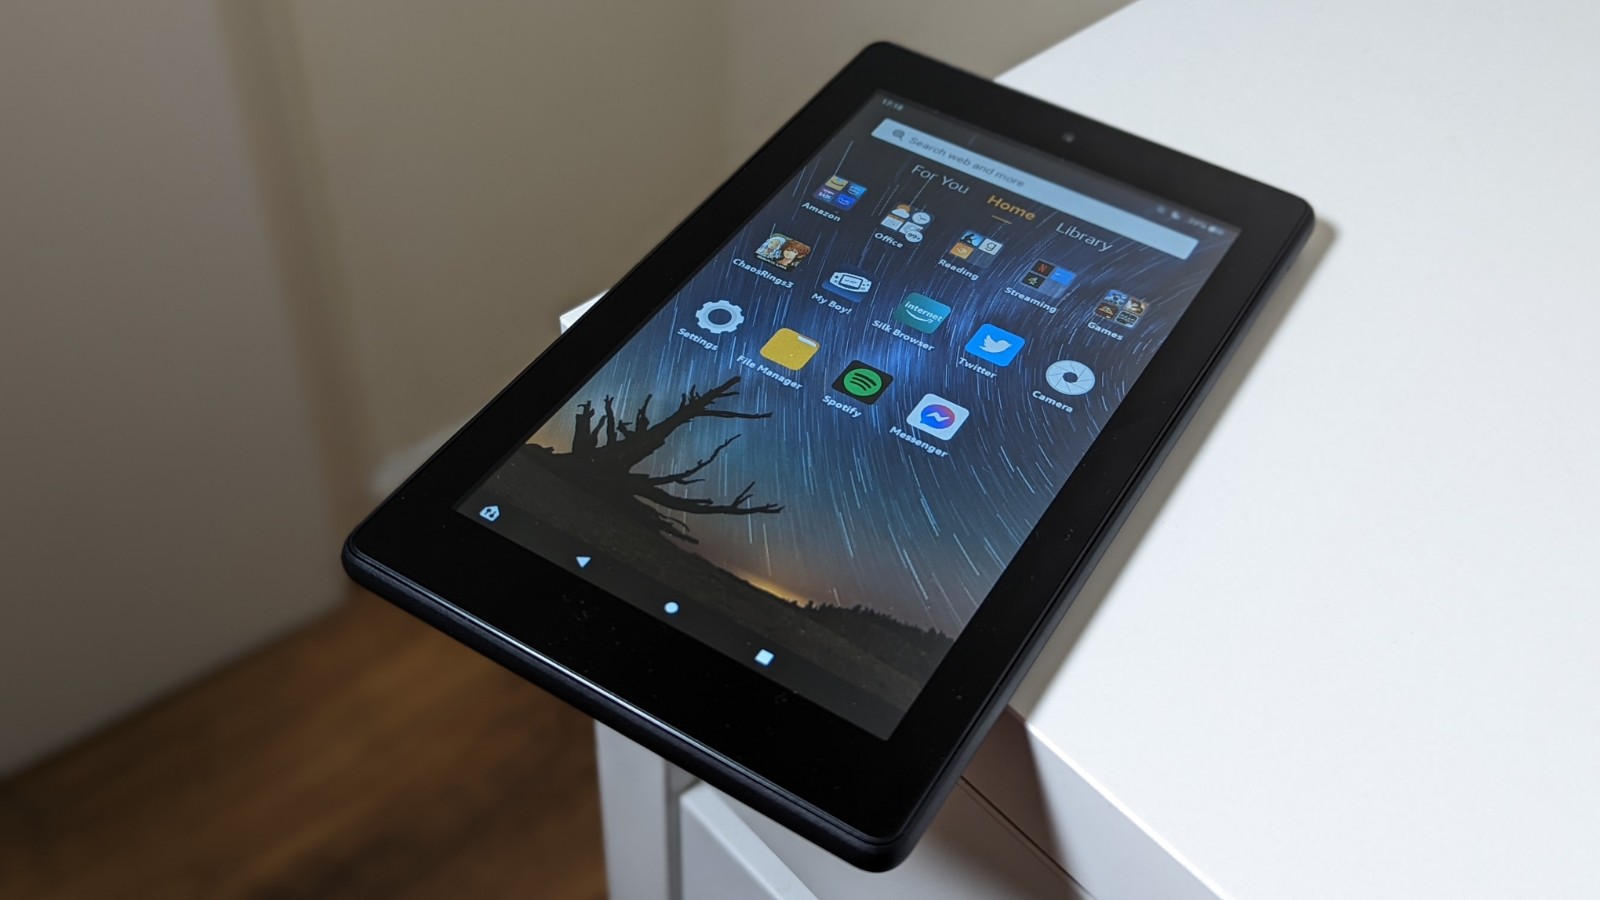 Fire 7 review: a budget tablet for the basics - The Verge